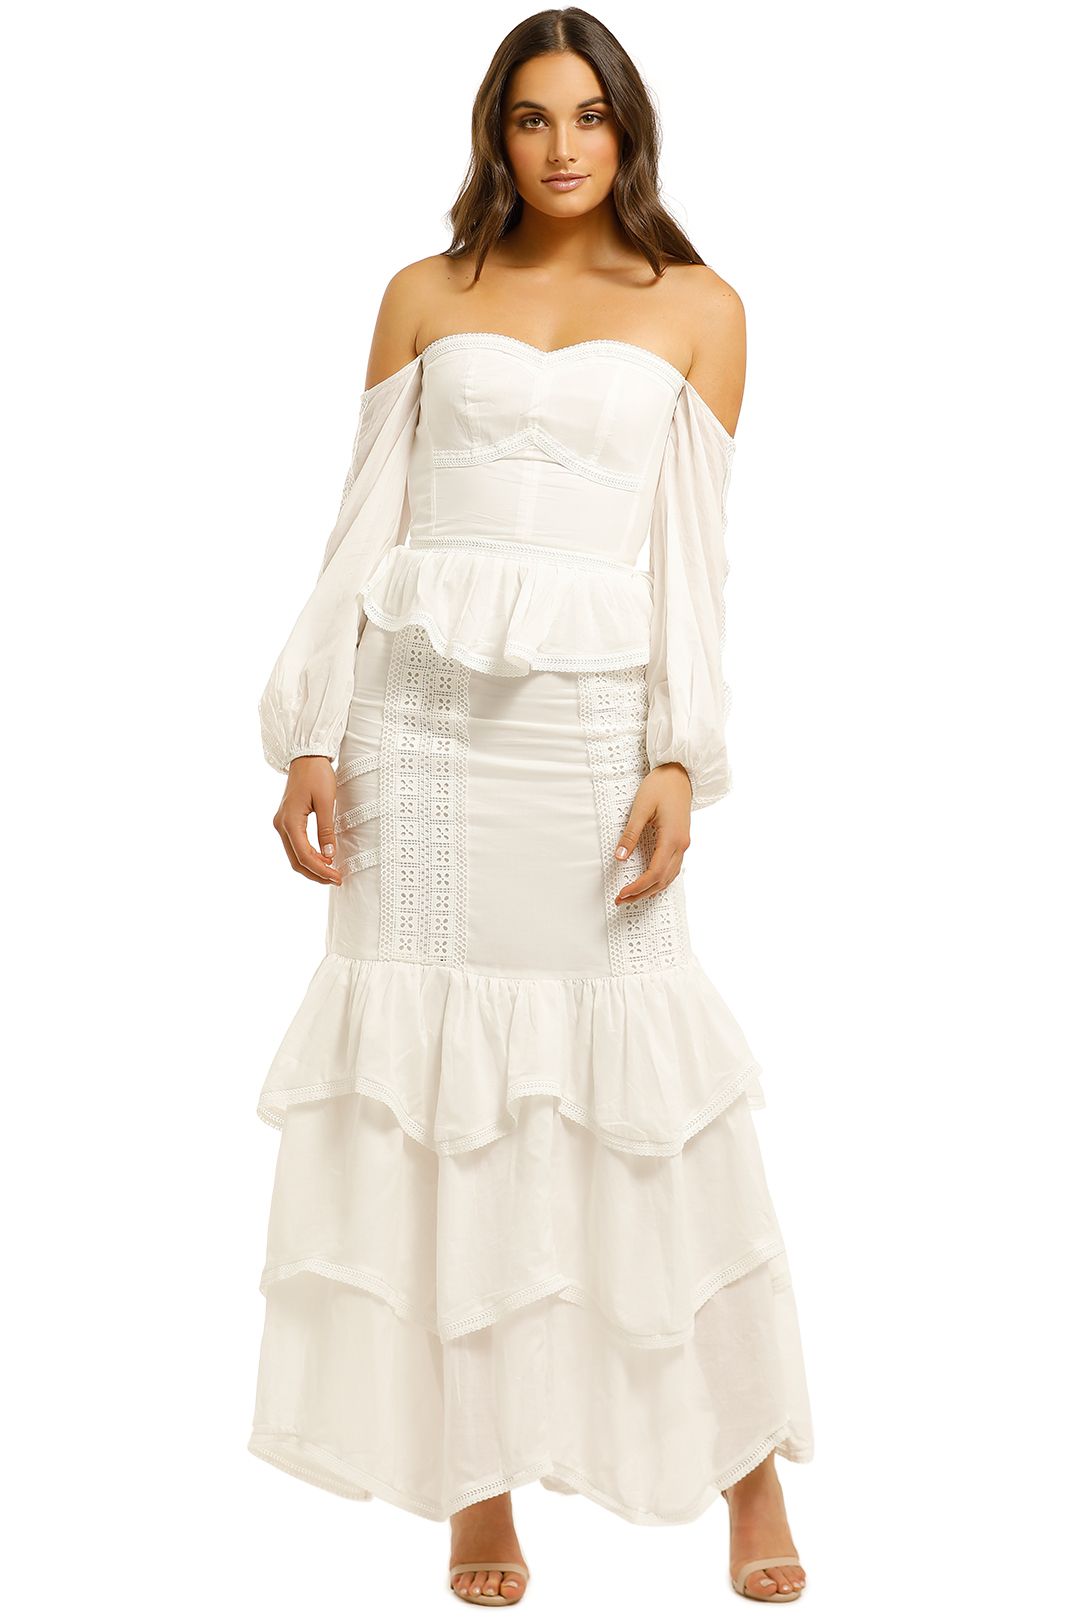 We-Are-Kindred-Sorrento-Bustier-Top-and-Skirt-Set-Ivory-Front